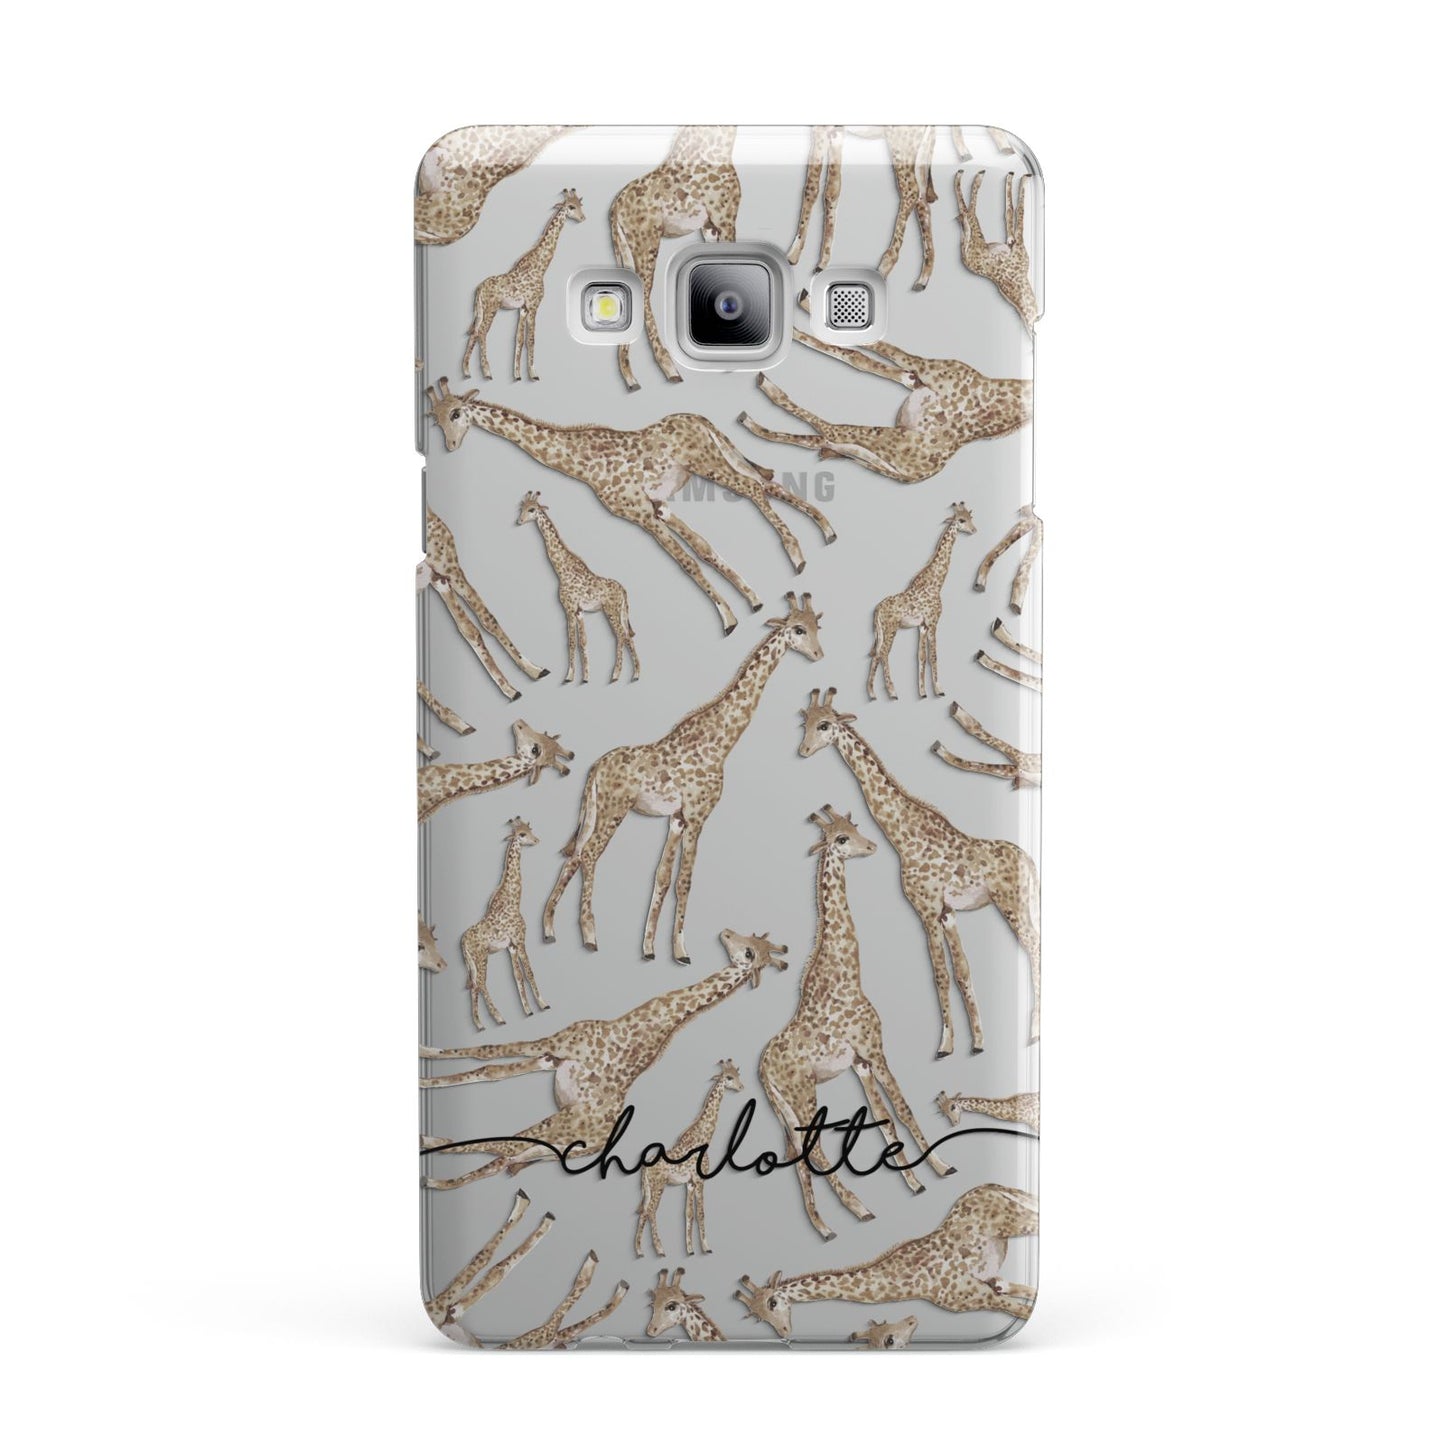 Personalised Giraffes with Name Samsung Galaxy A7 2015 Case